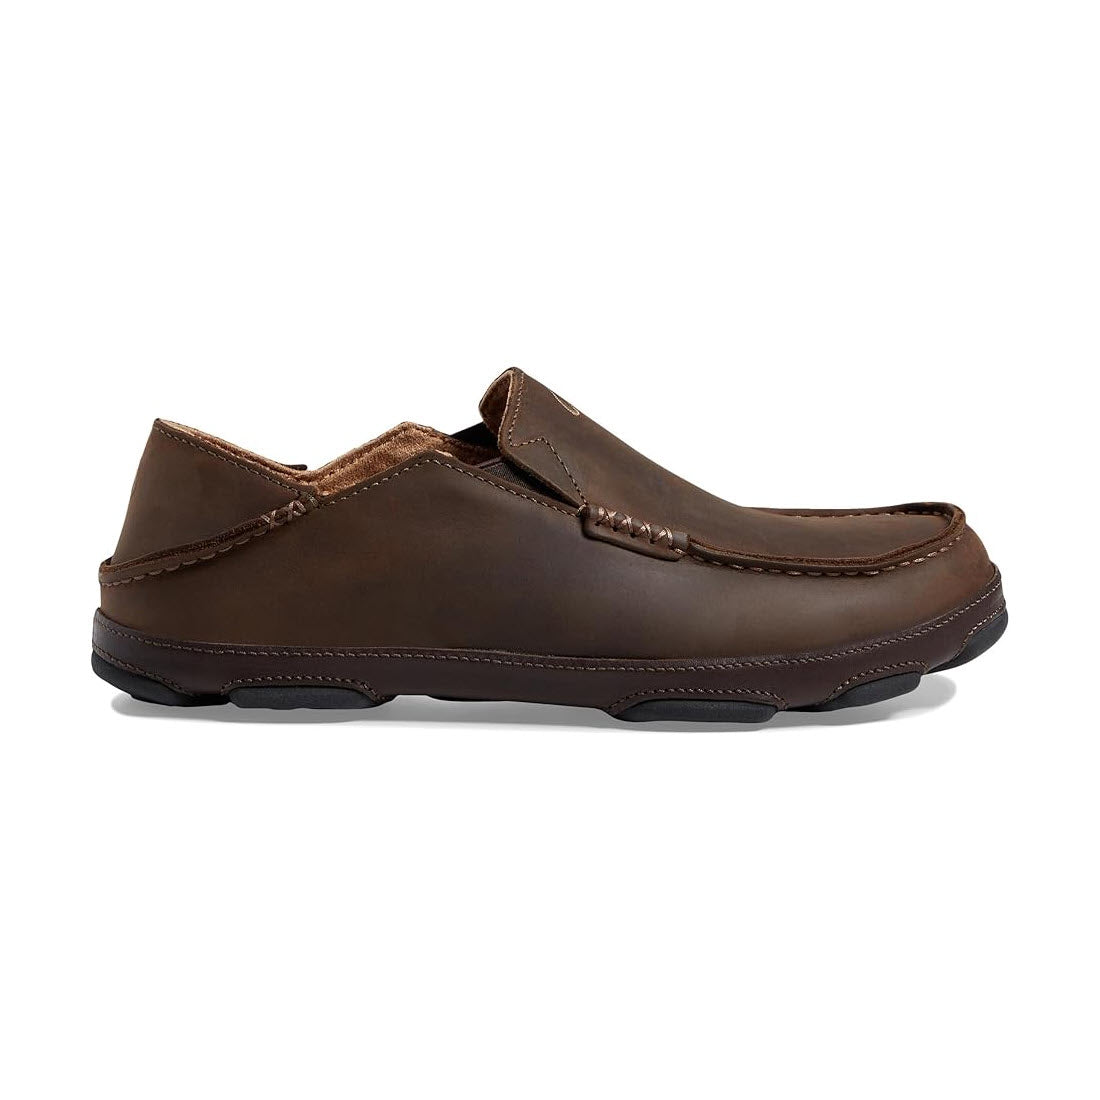 A single water-resistant leather casual men's Olukai Moloa slip-on shoe against a white background.